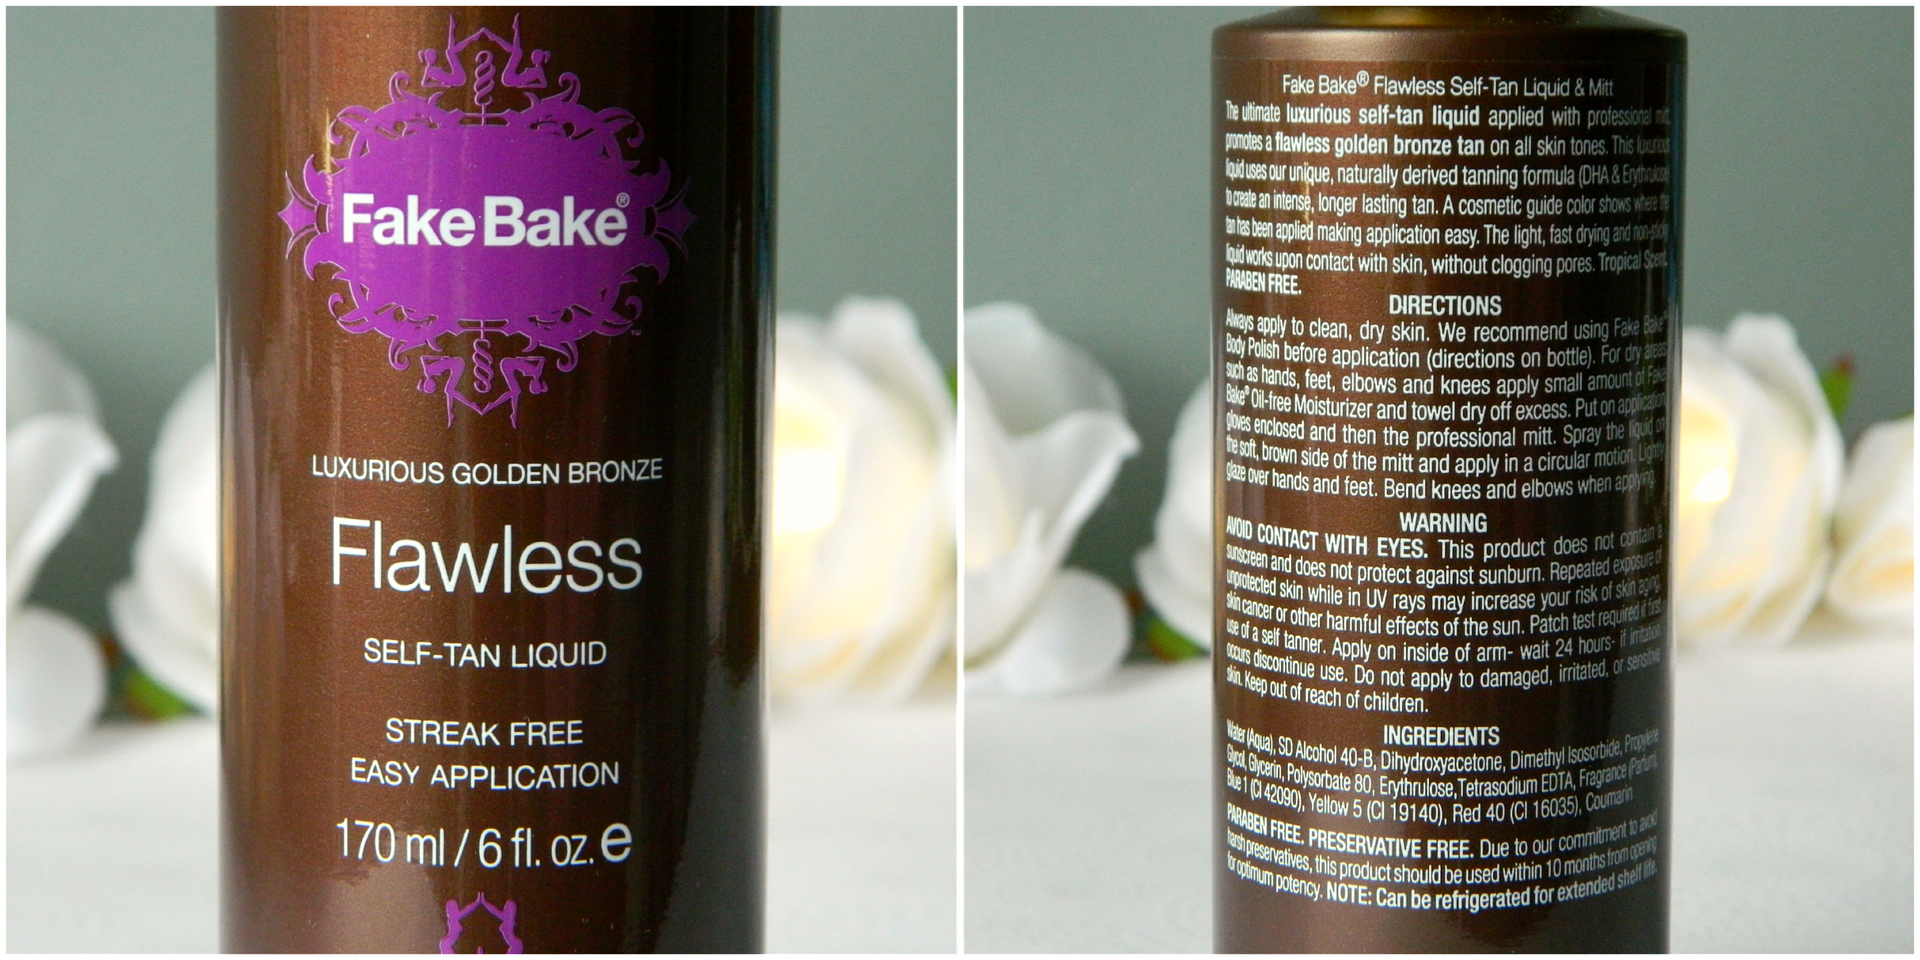 Fake Bake Flawless Self Tan Liquid Bottle And Directions Review Belle-amie